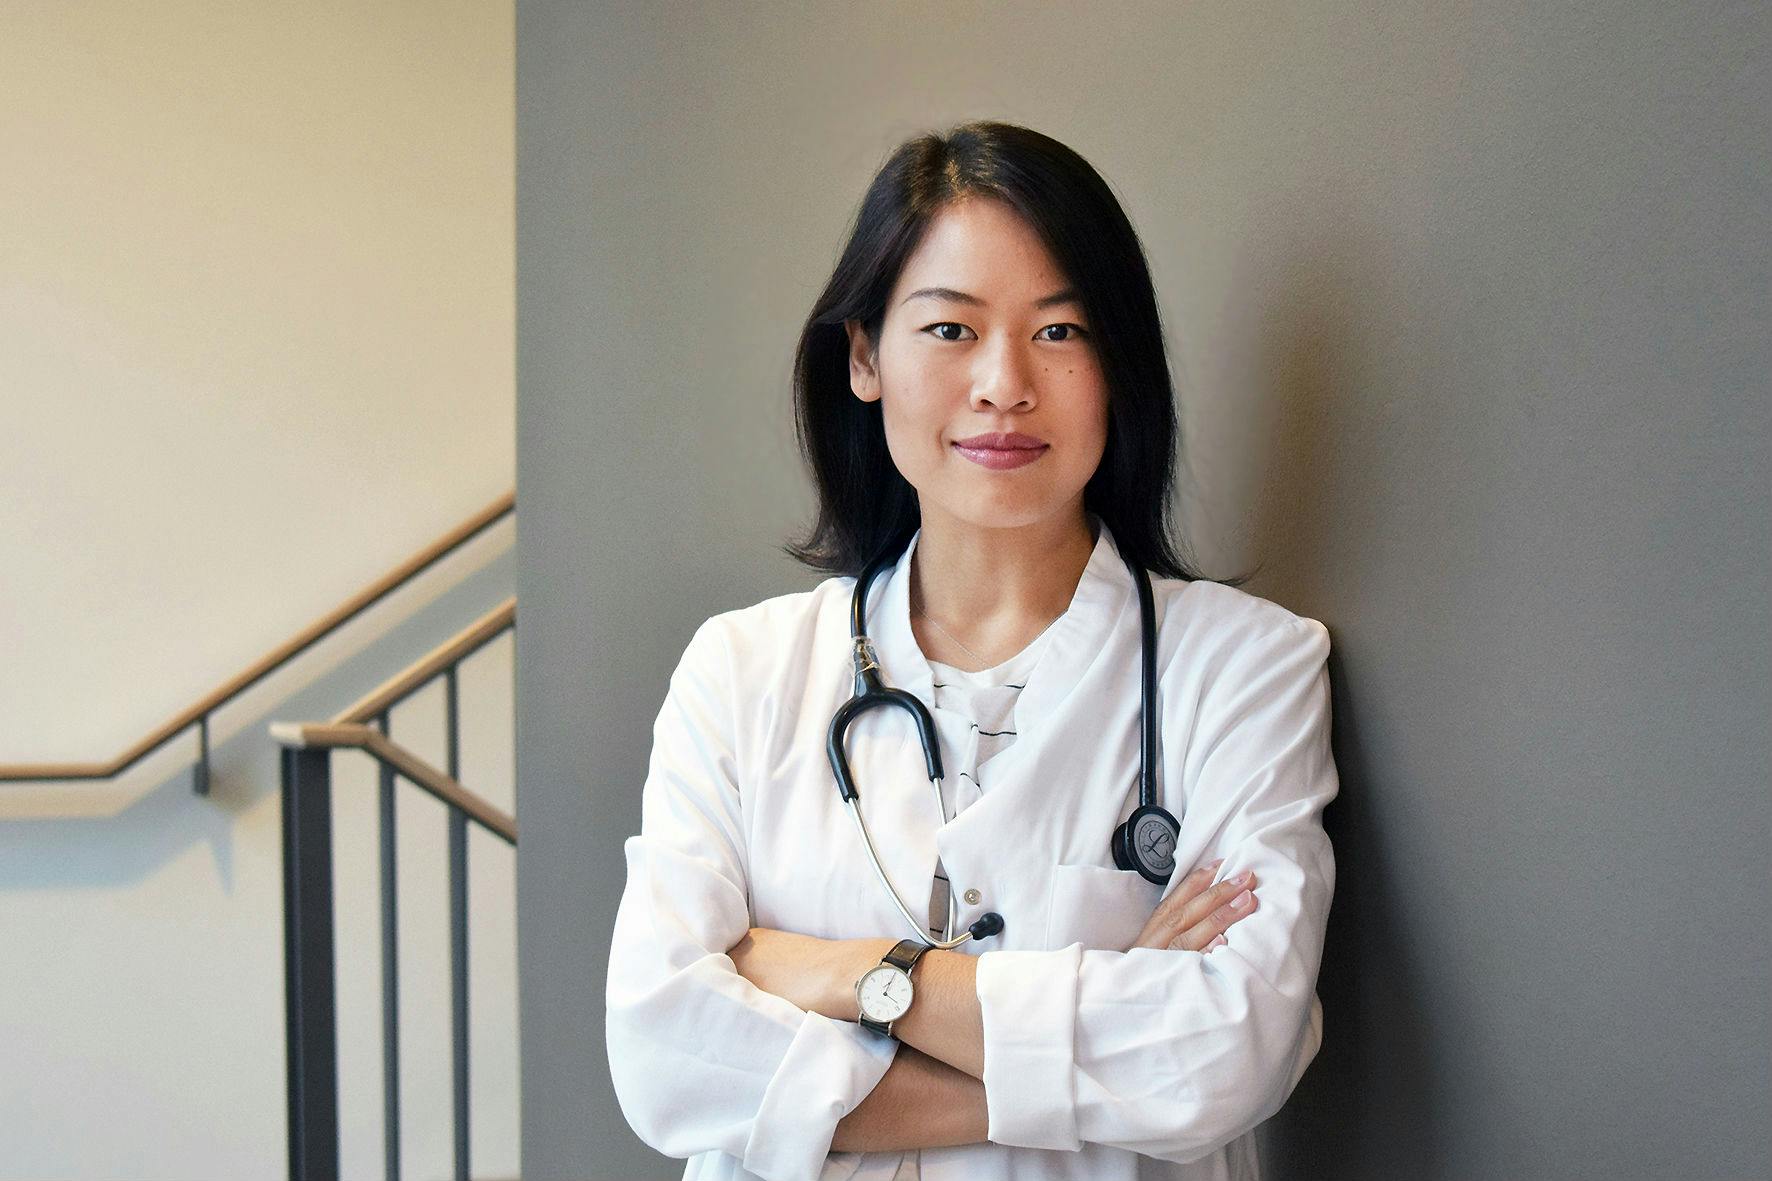 Dr Sophie Chung, Founder of Qunomedical